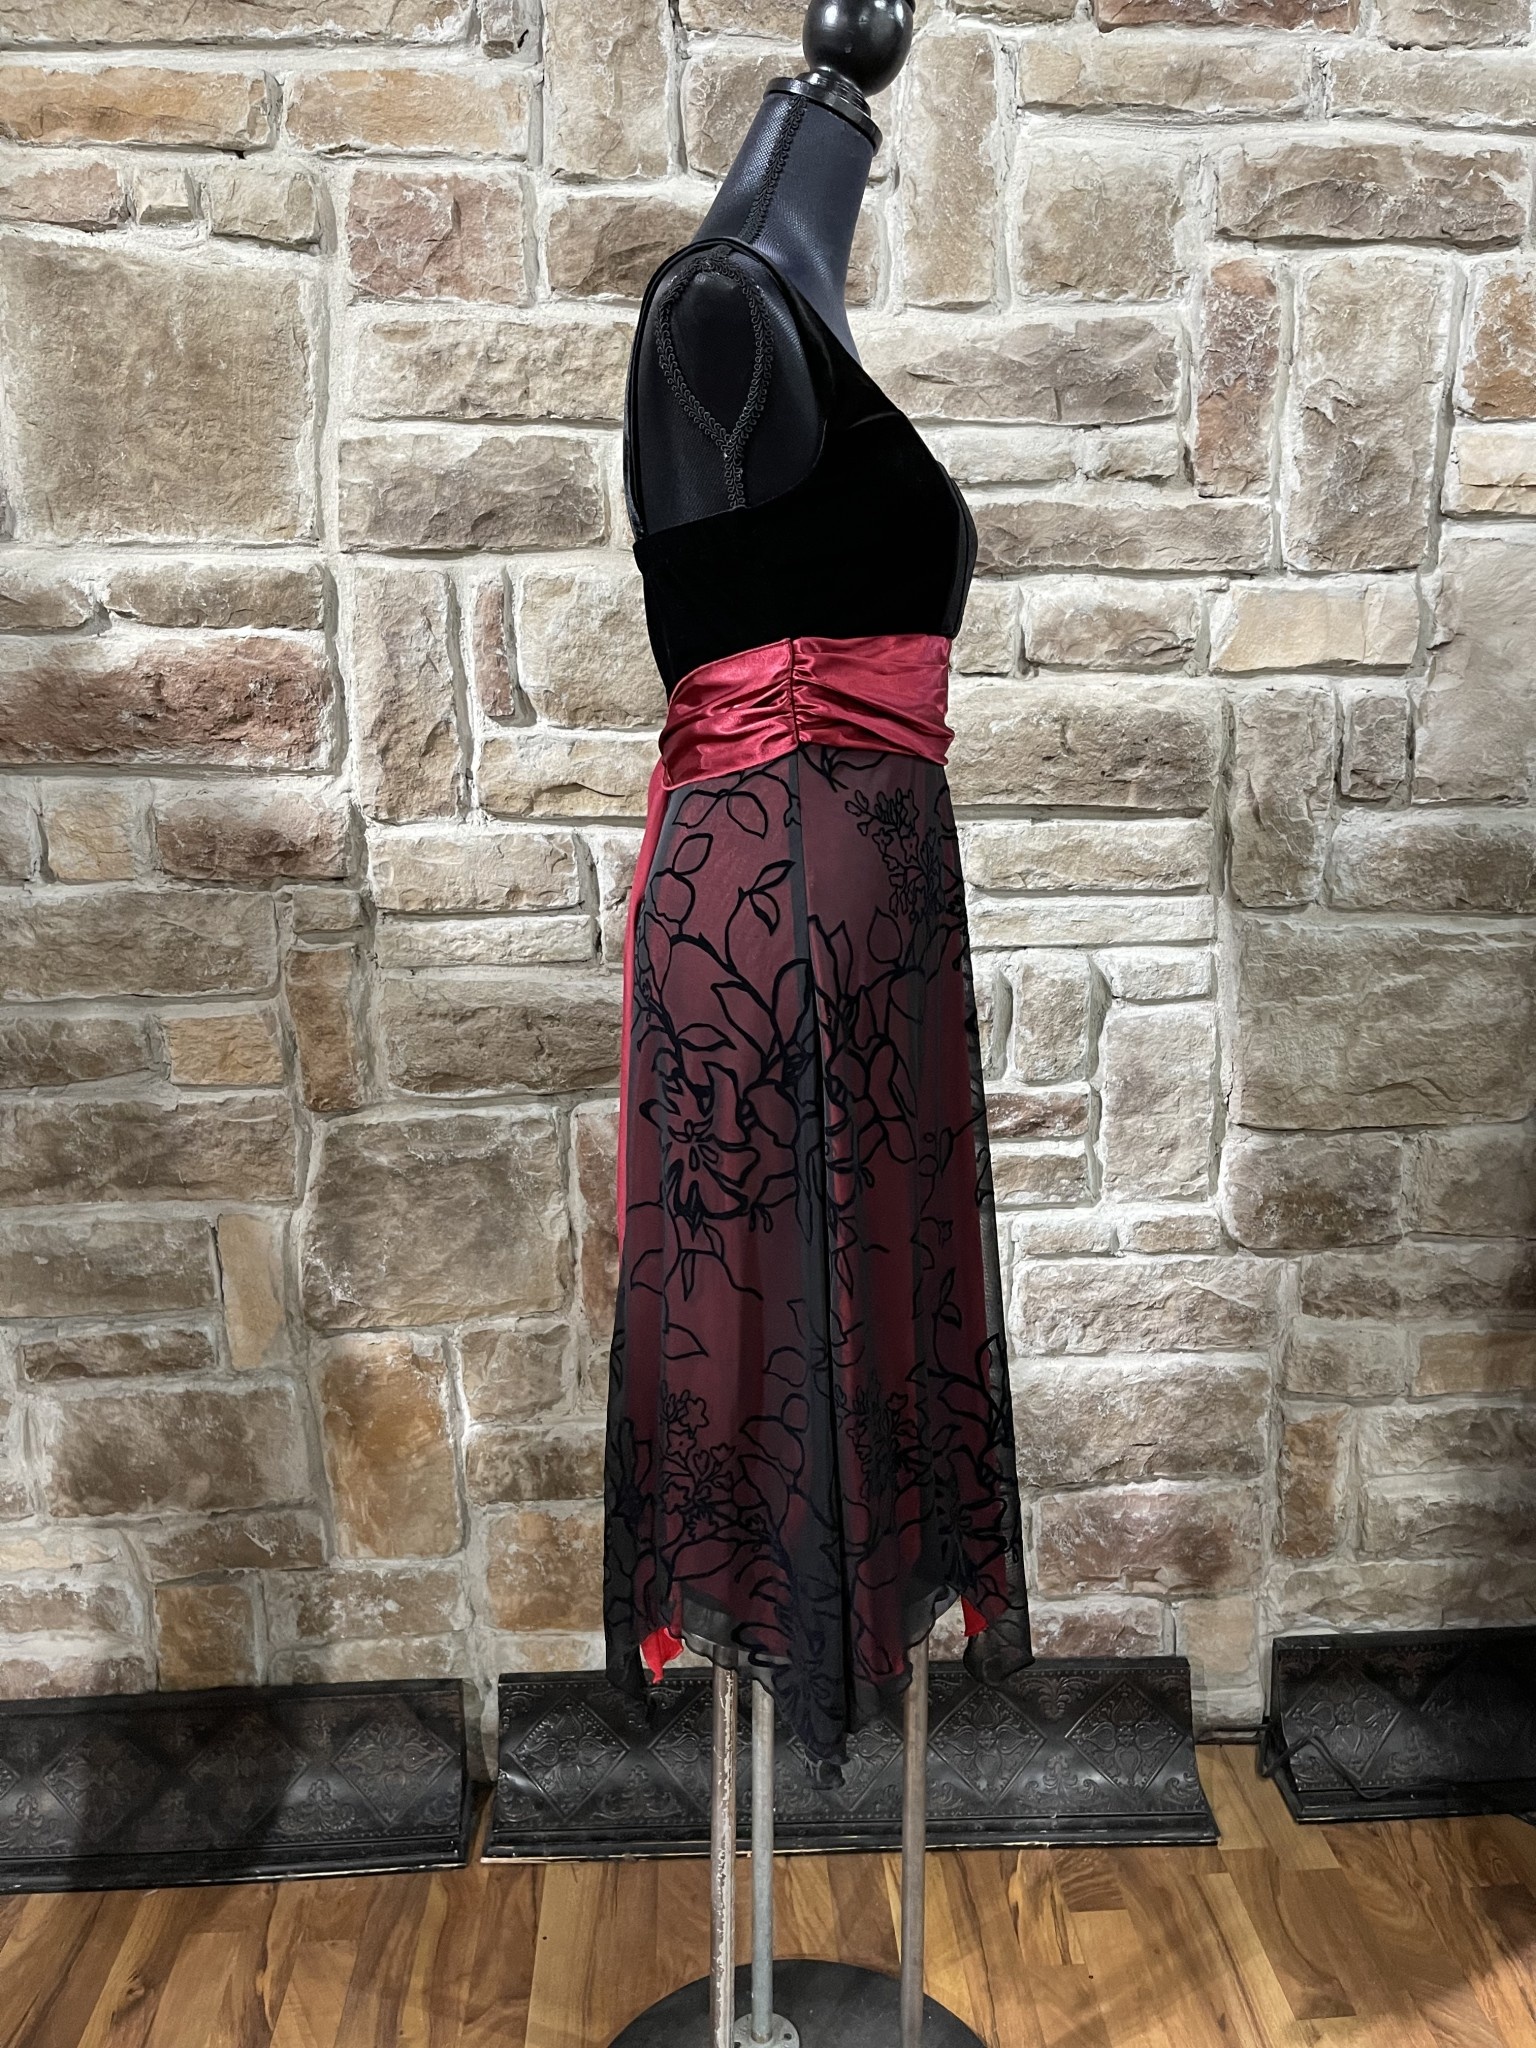 Black & Red Dress with Velvet Top, Red Sash and Black Floral Overlay Skirt,  Size S - Elements Unleashed